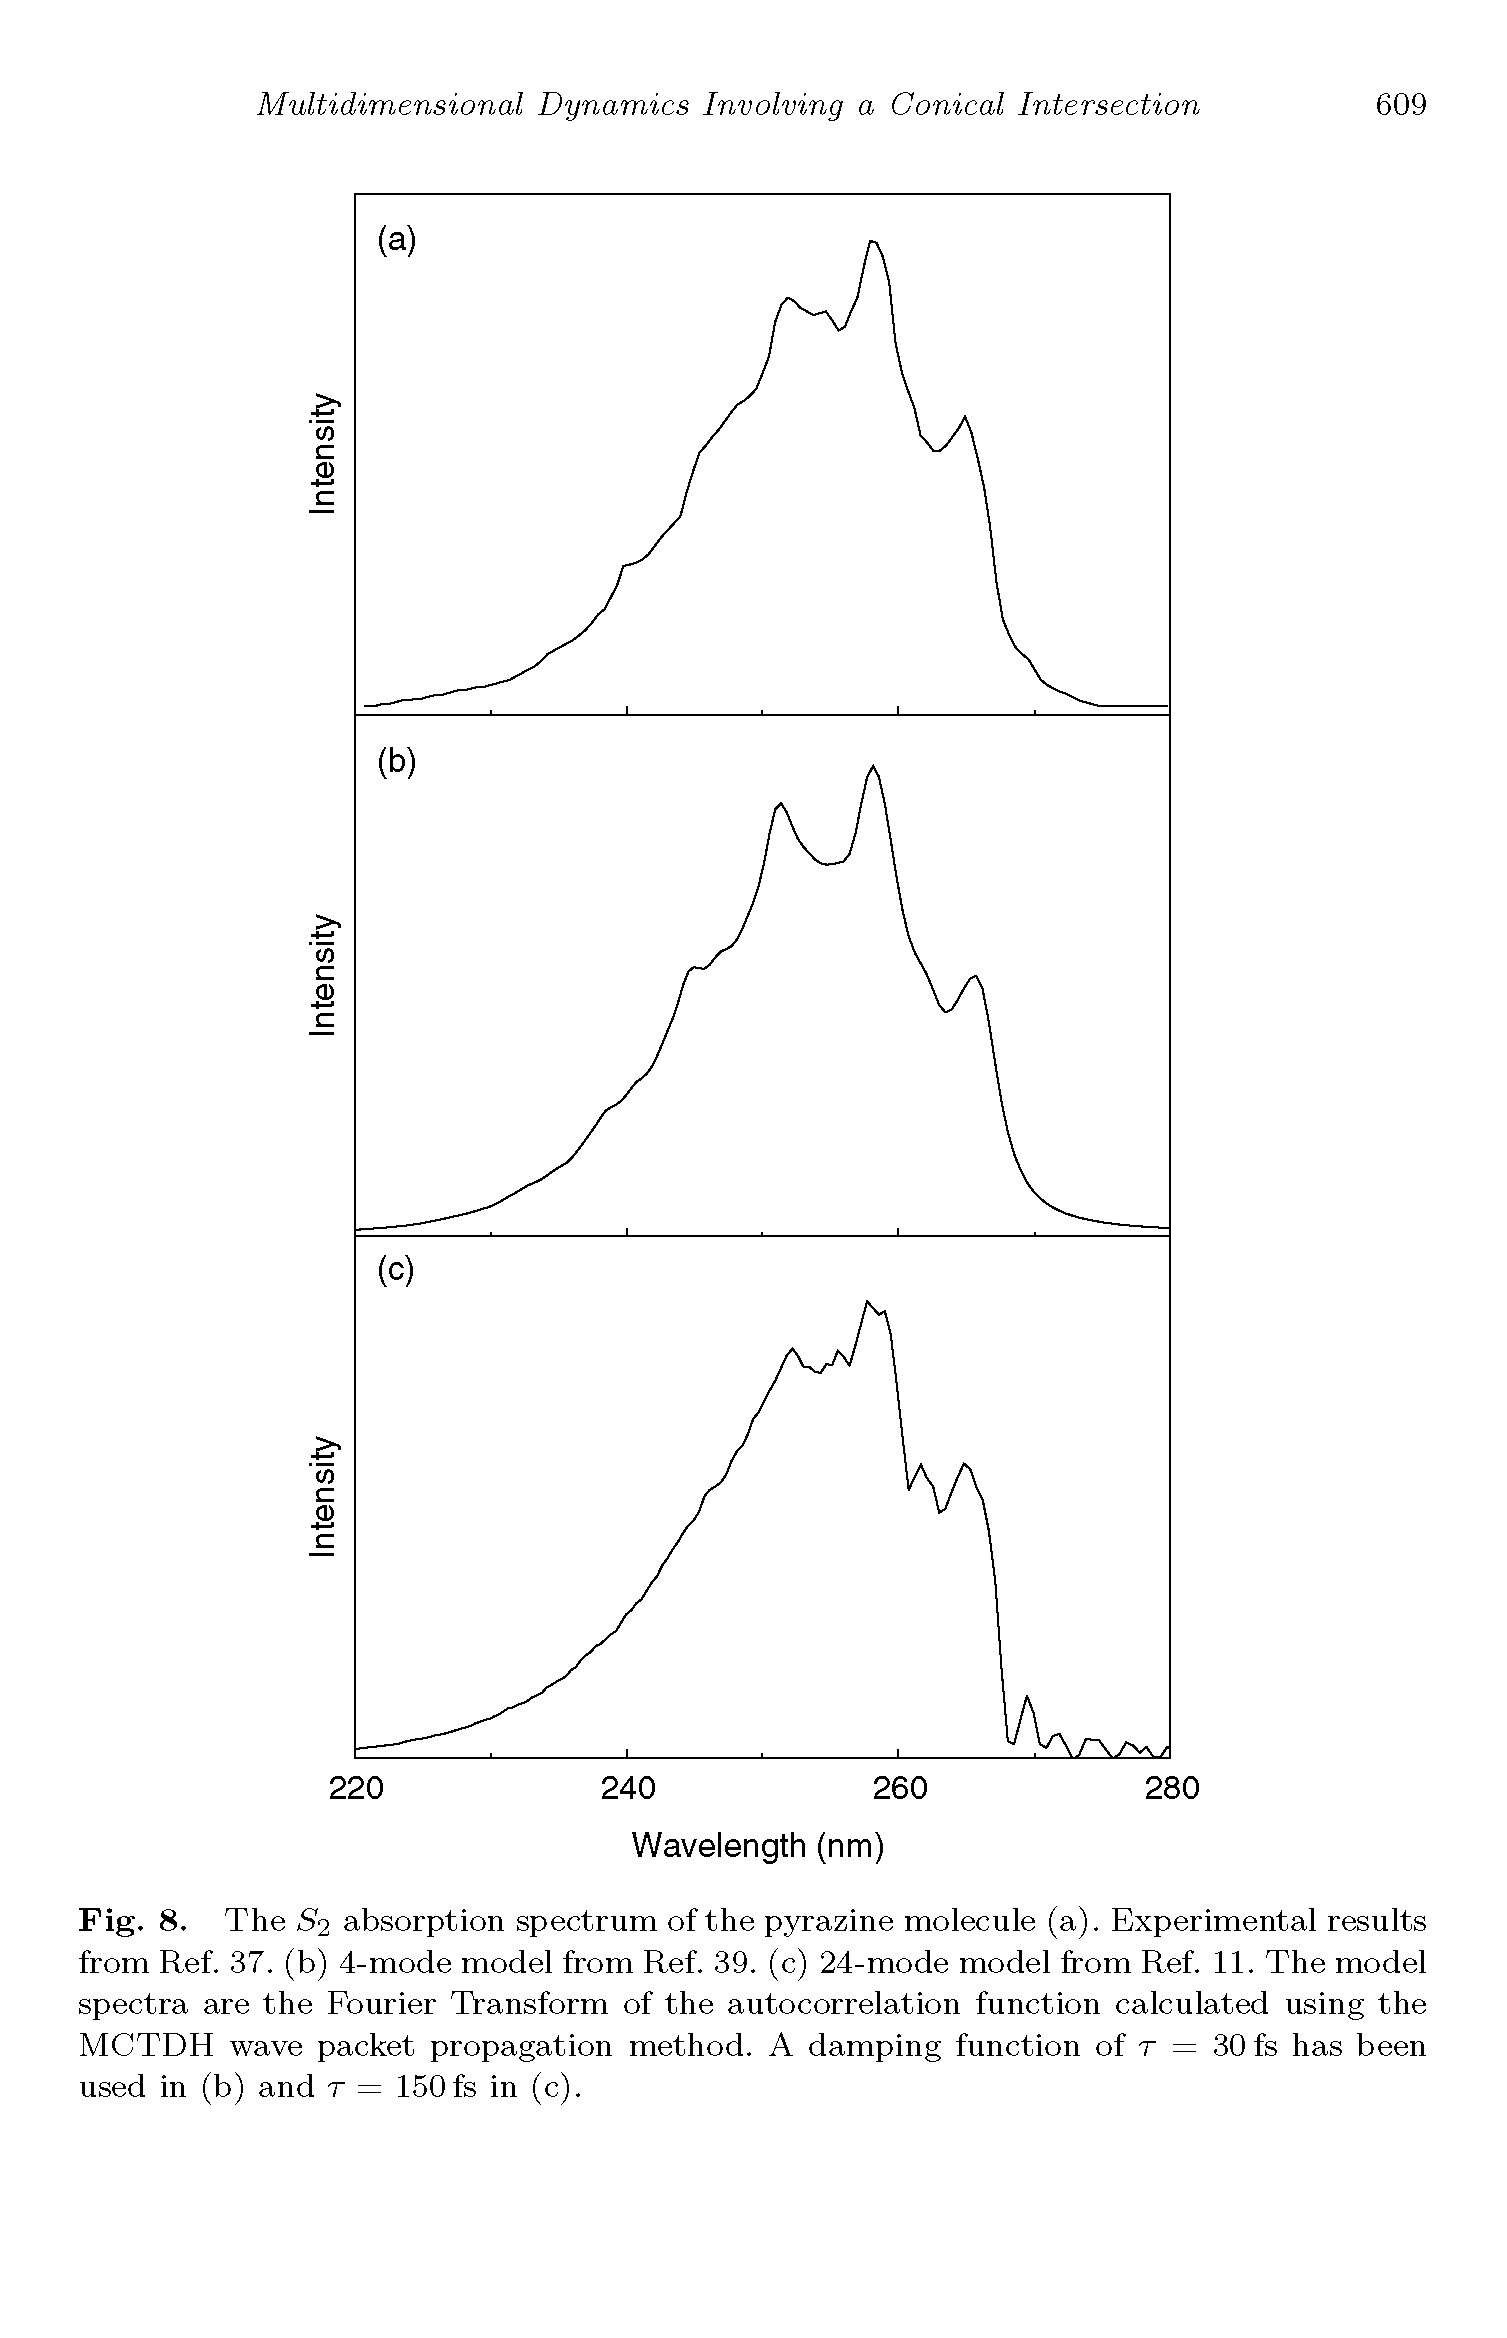 Fig. 8. The S2 absorption spectrum of the pyrazine molecule (a). Experimental results from Ref. 37. (b) 4-mode model from Ref. 39. (c) 24-mode model from Ref. 11. The model spectra are the Fourier Transform of the autocorrelation function calculated using the MCTDH wave packet propagation method. A damping function of r = 30 fs has been used in (b) and r = 150 fs in (c).